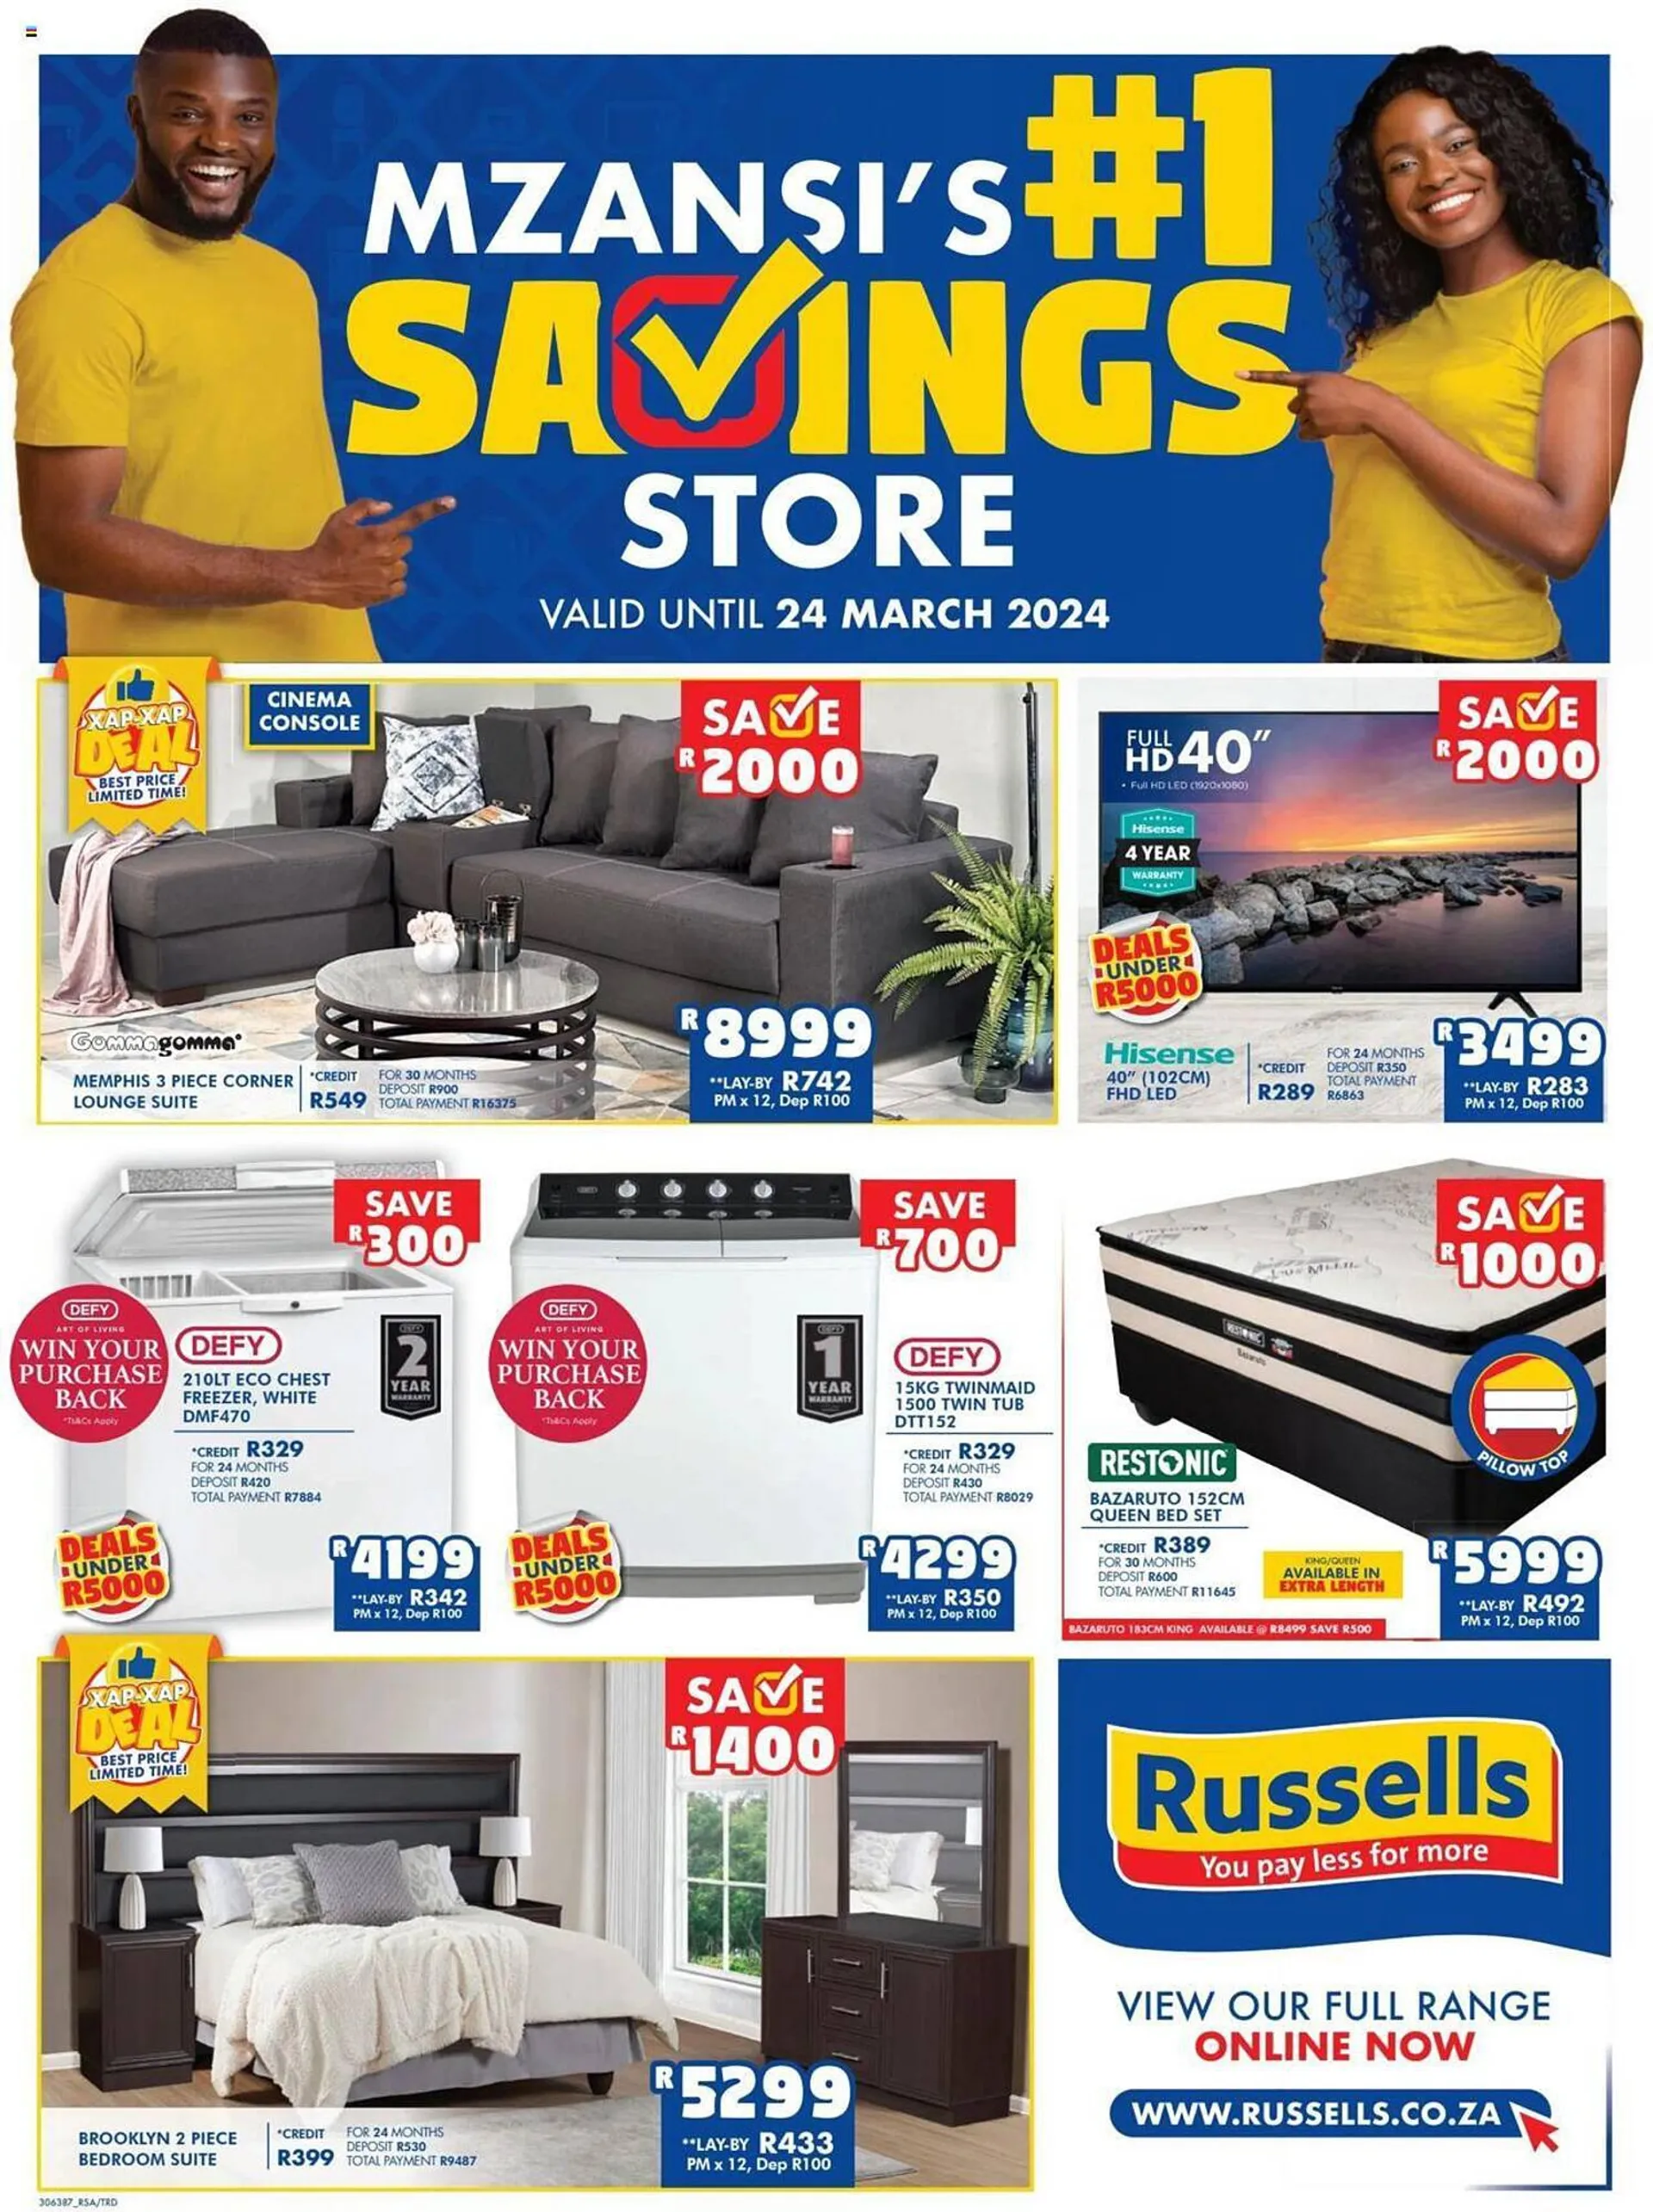 Russells catalogue - 11 March 24 March 2024